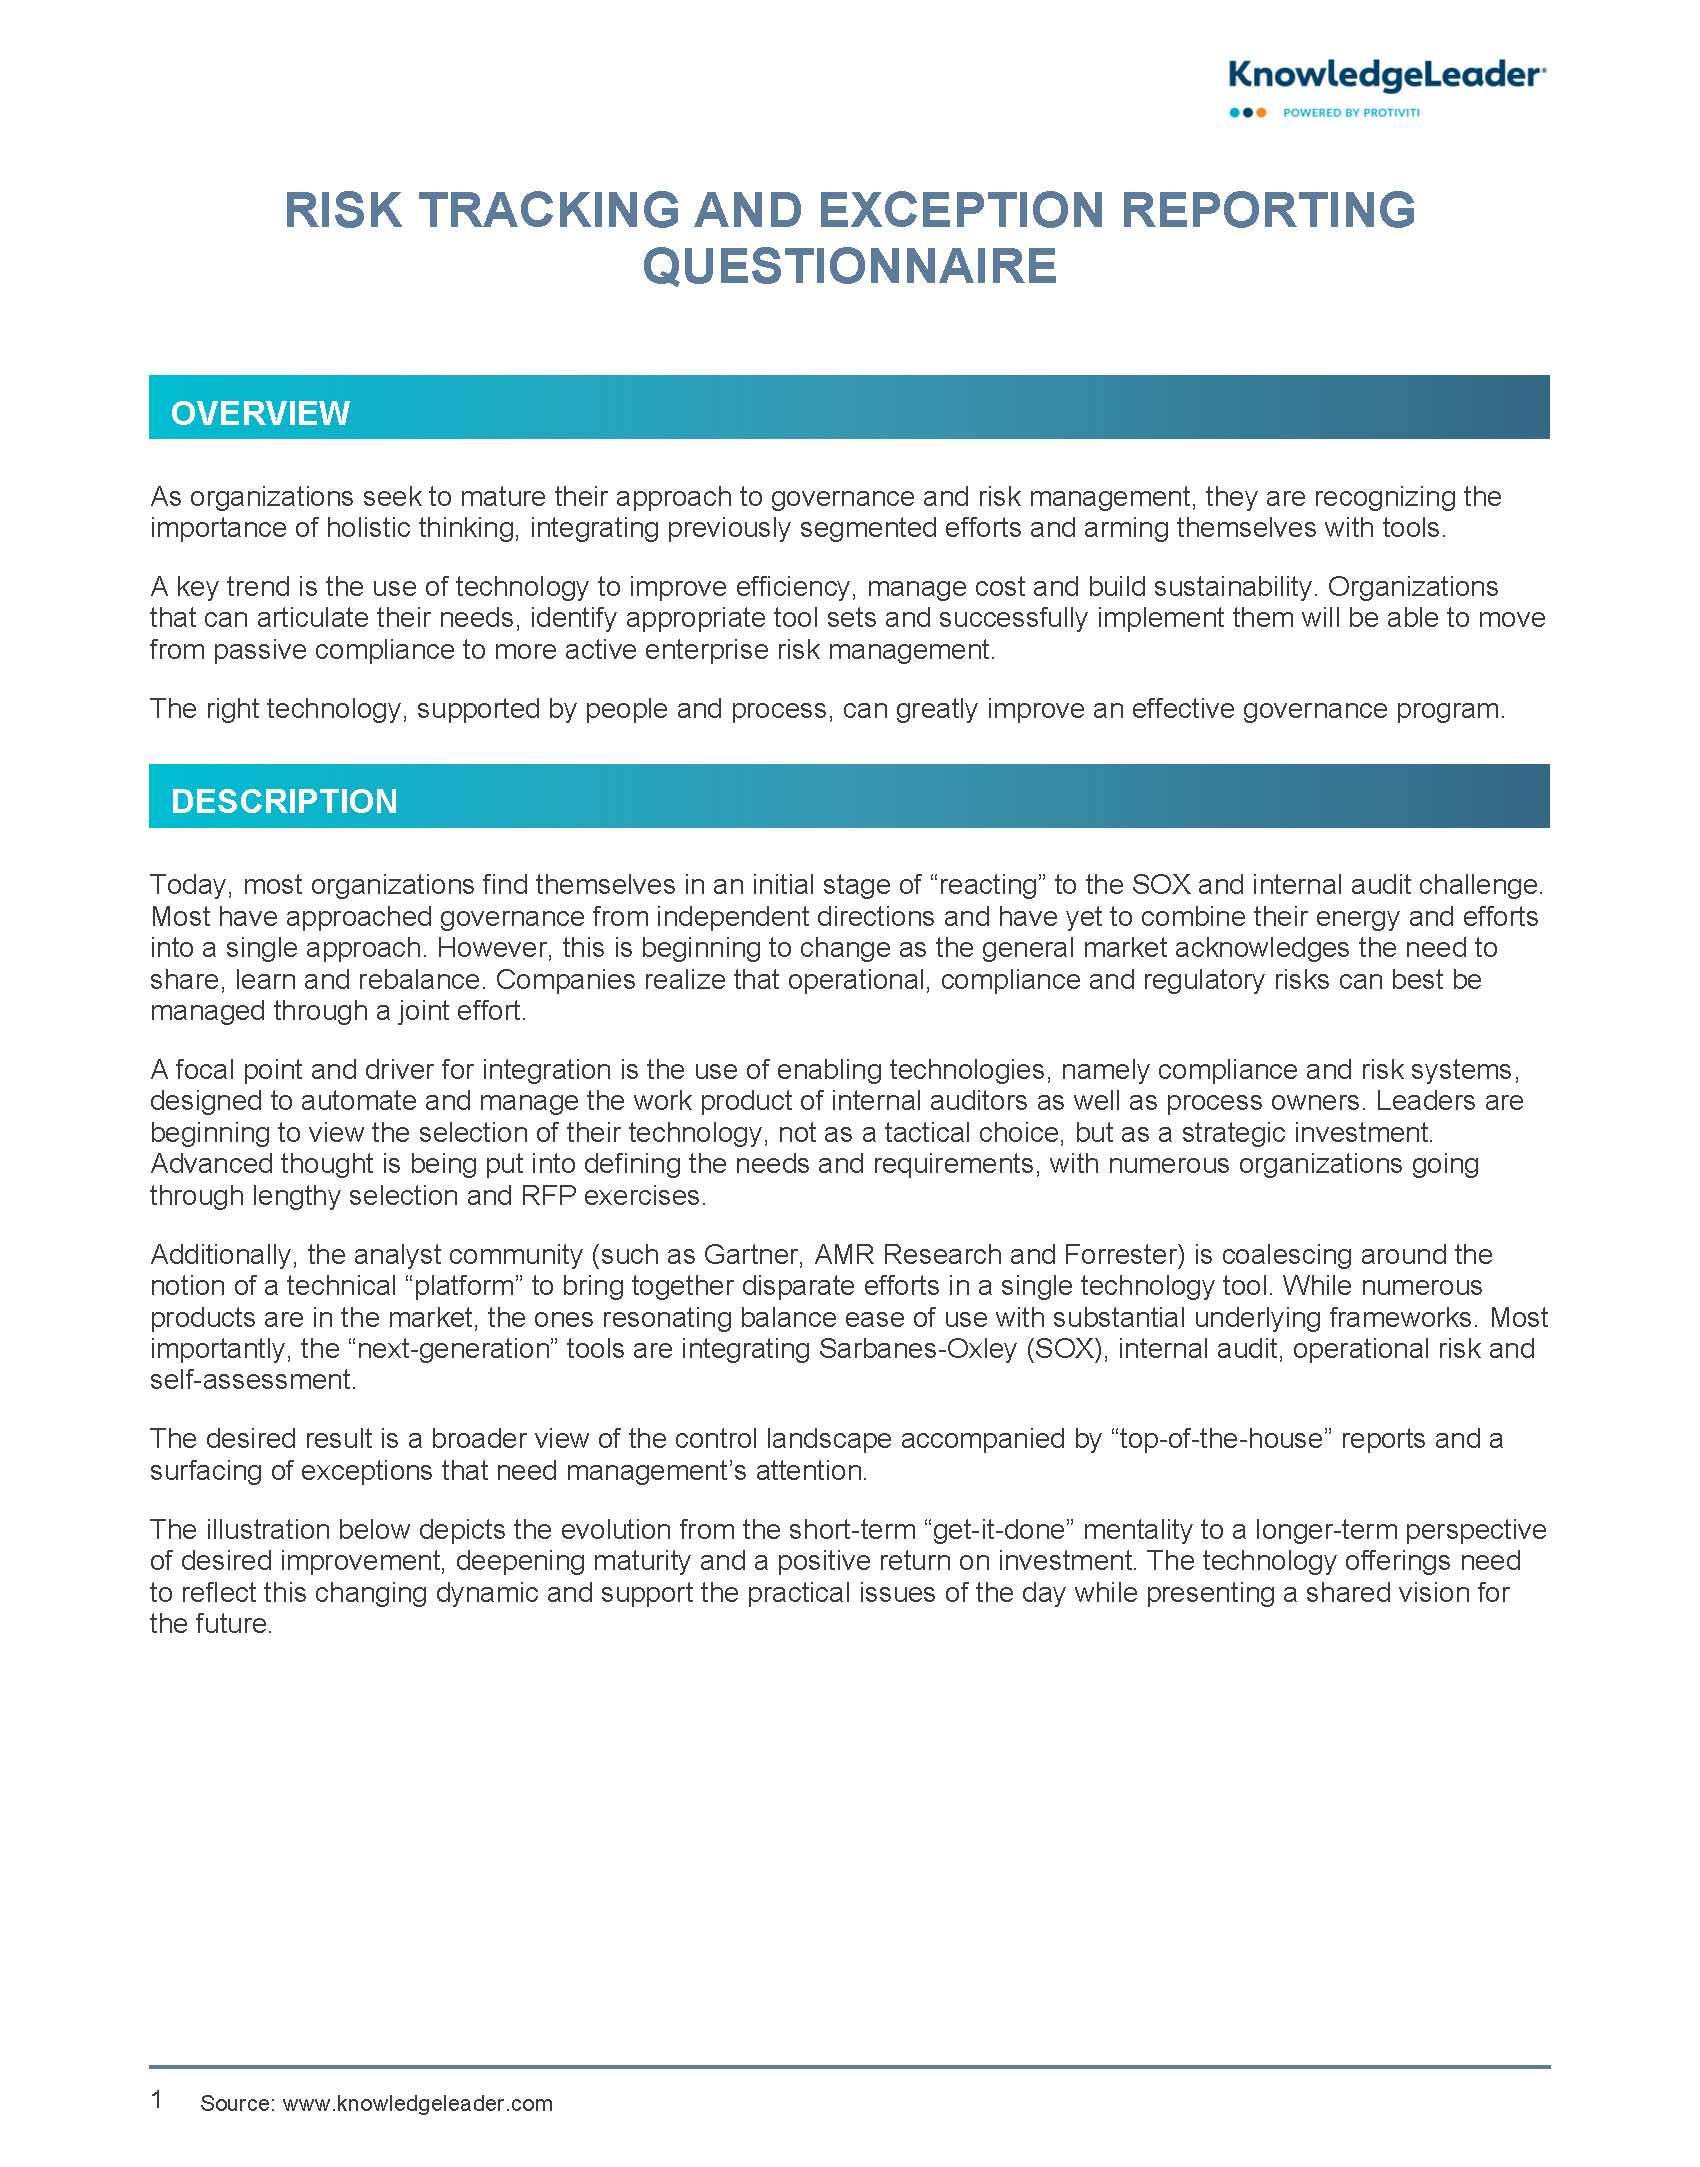 Risk Tracking and Exception Reporting Questionnaire